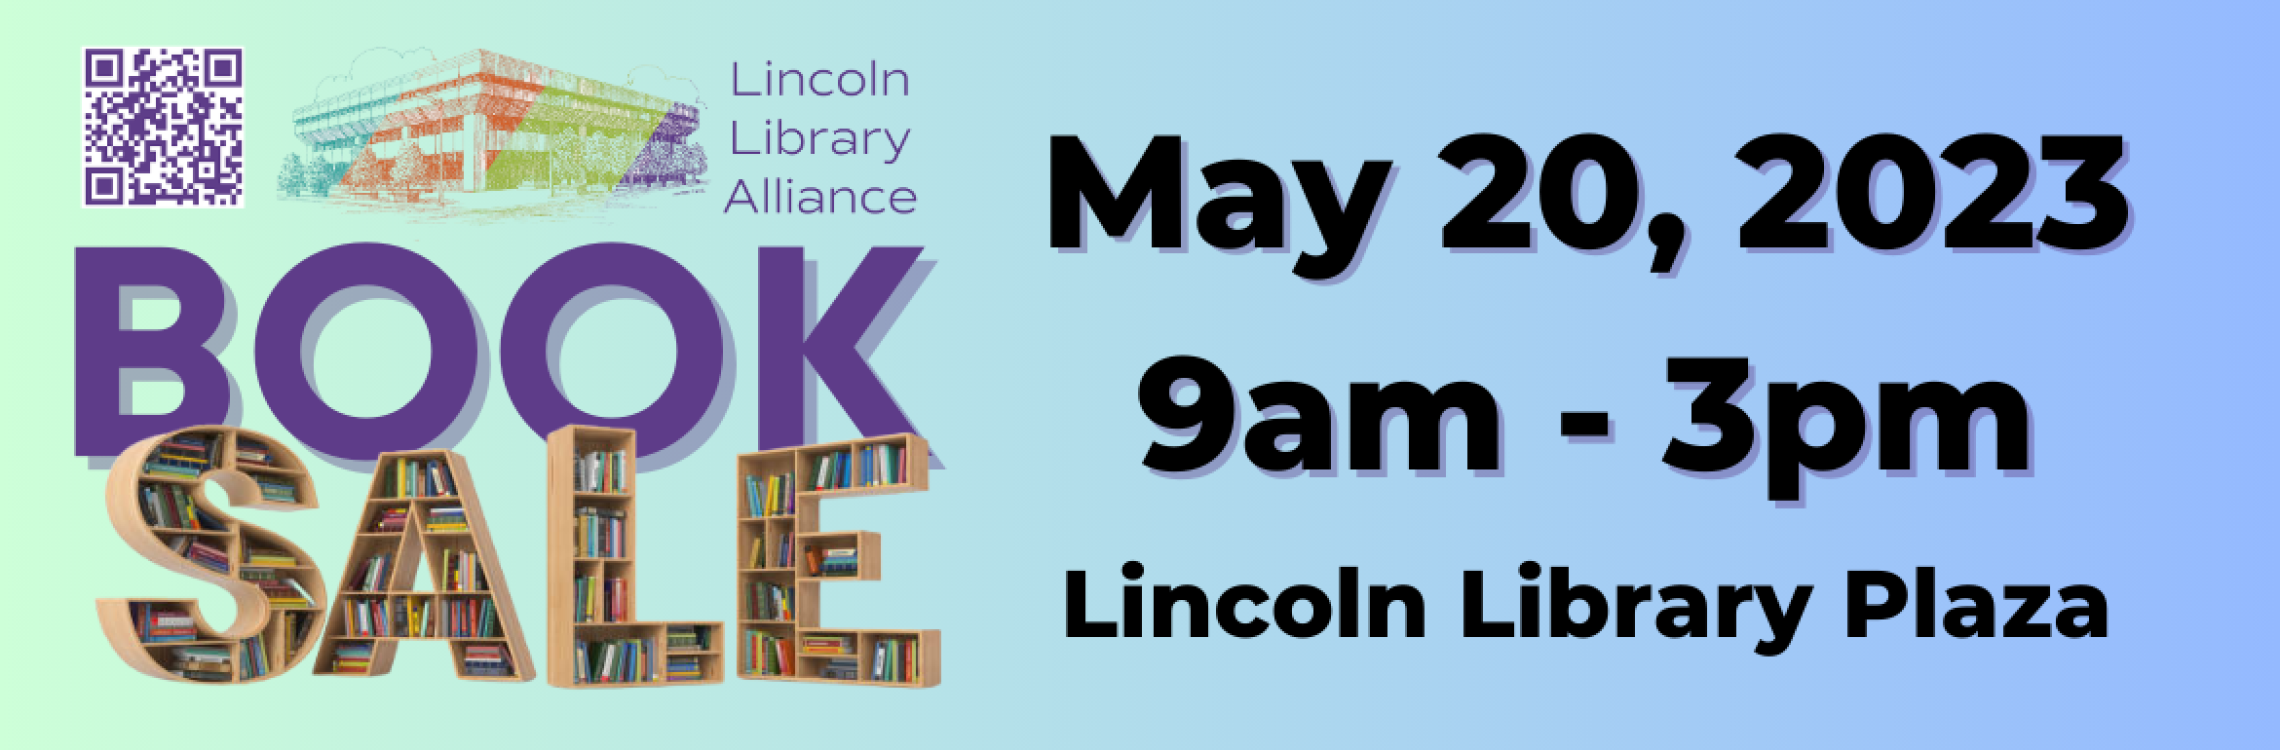 Lincoln Library Alliance Book Sale May 20, 2023 9am-3pm